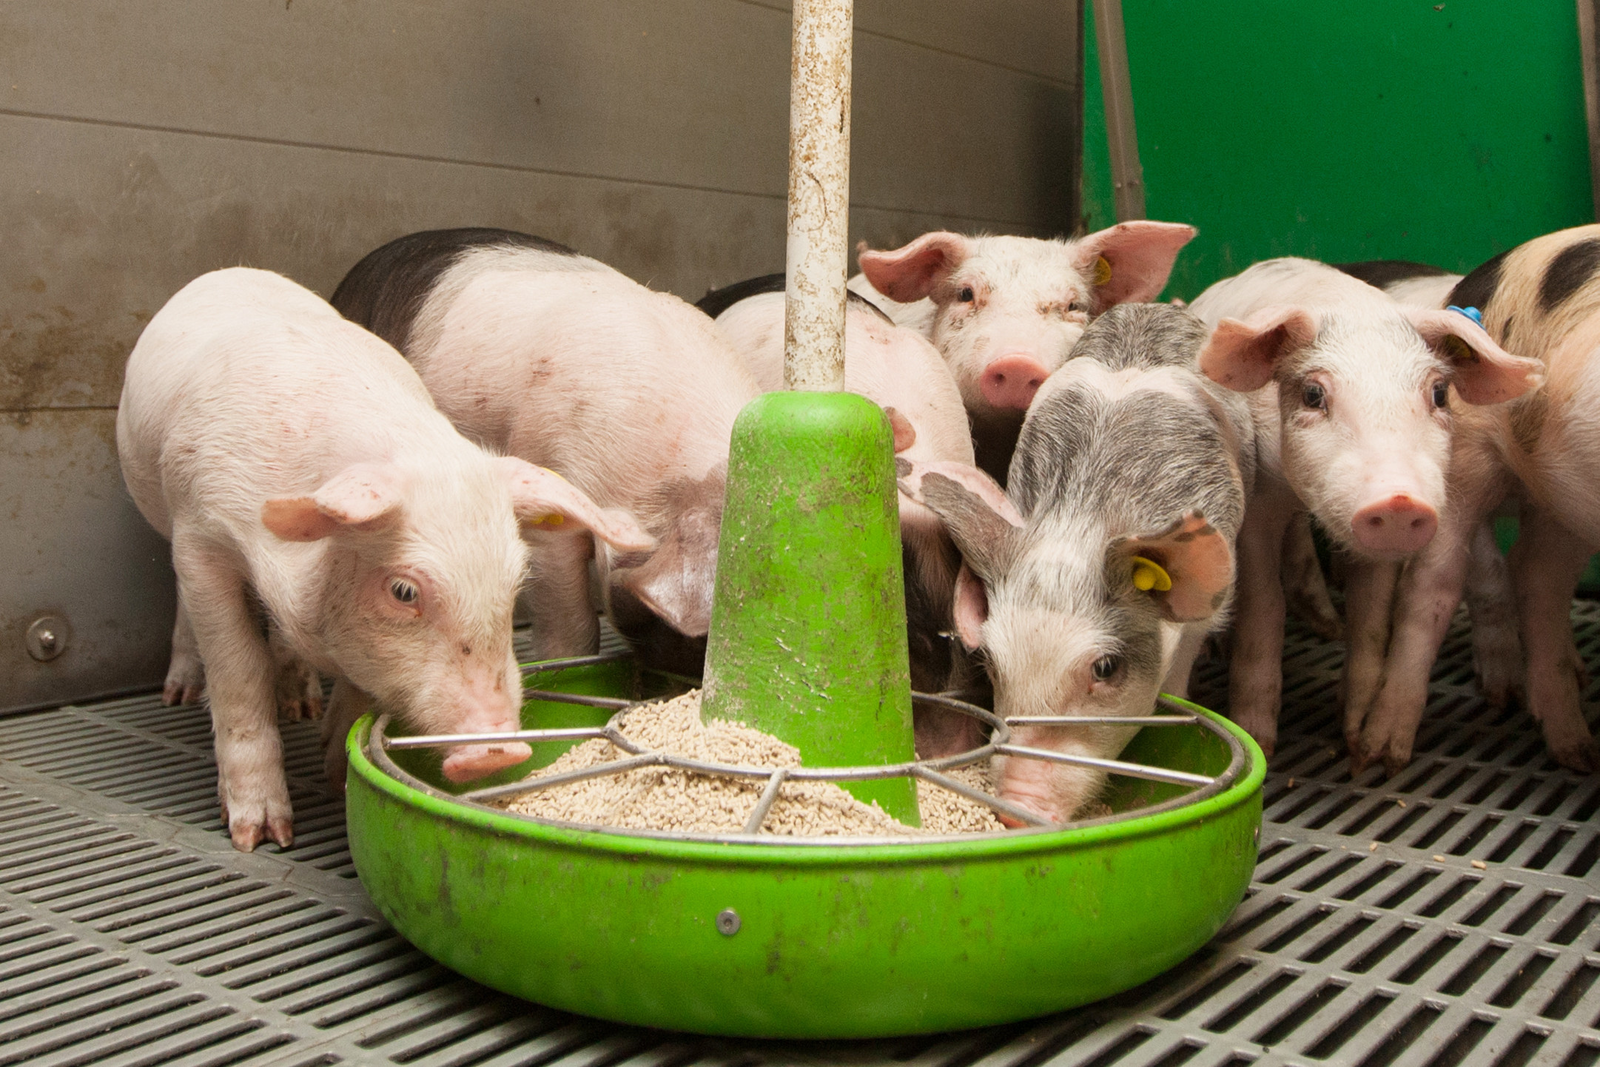 3 ways to make piglets eat dry feed - All About Feed